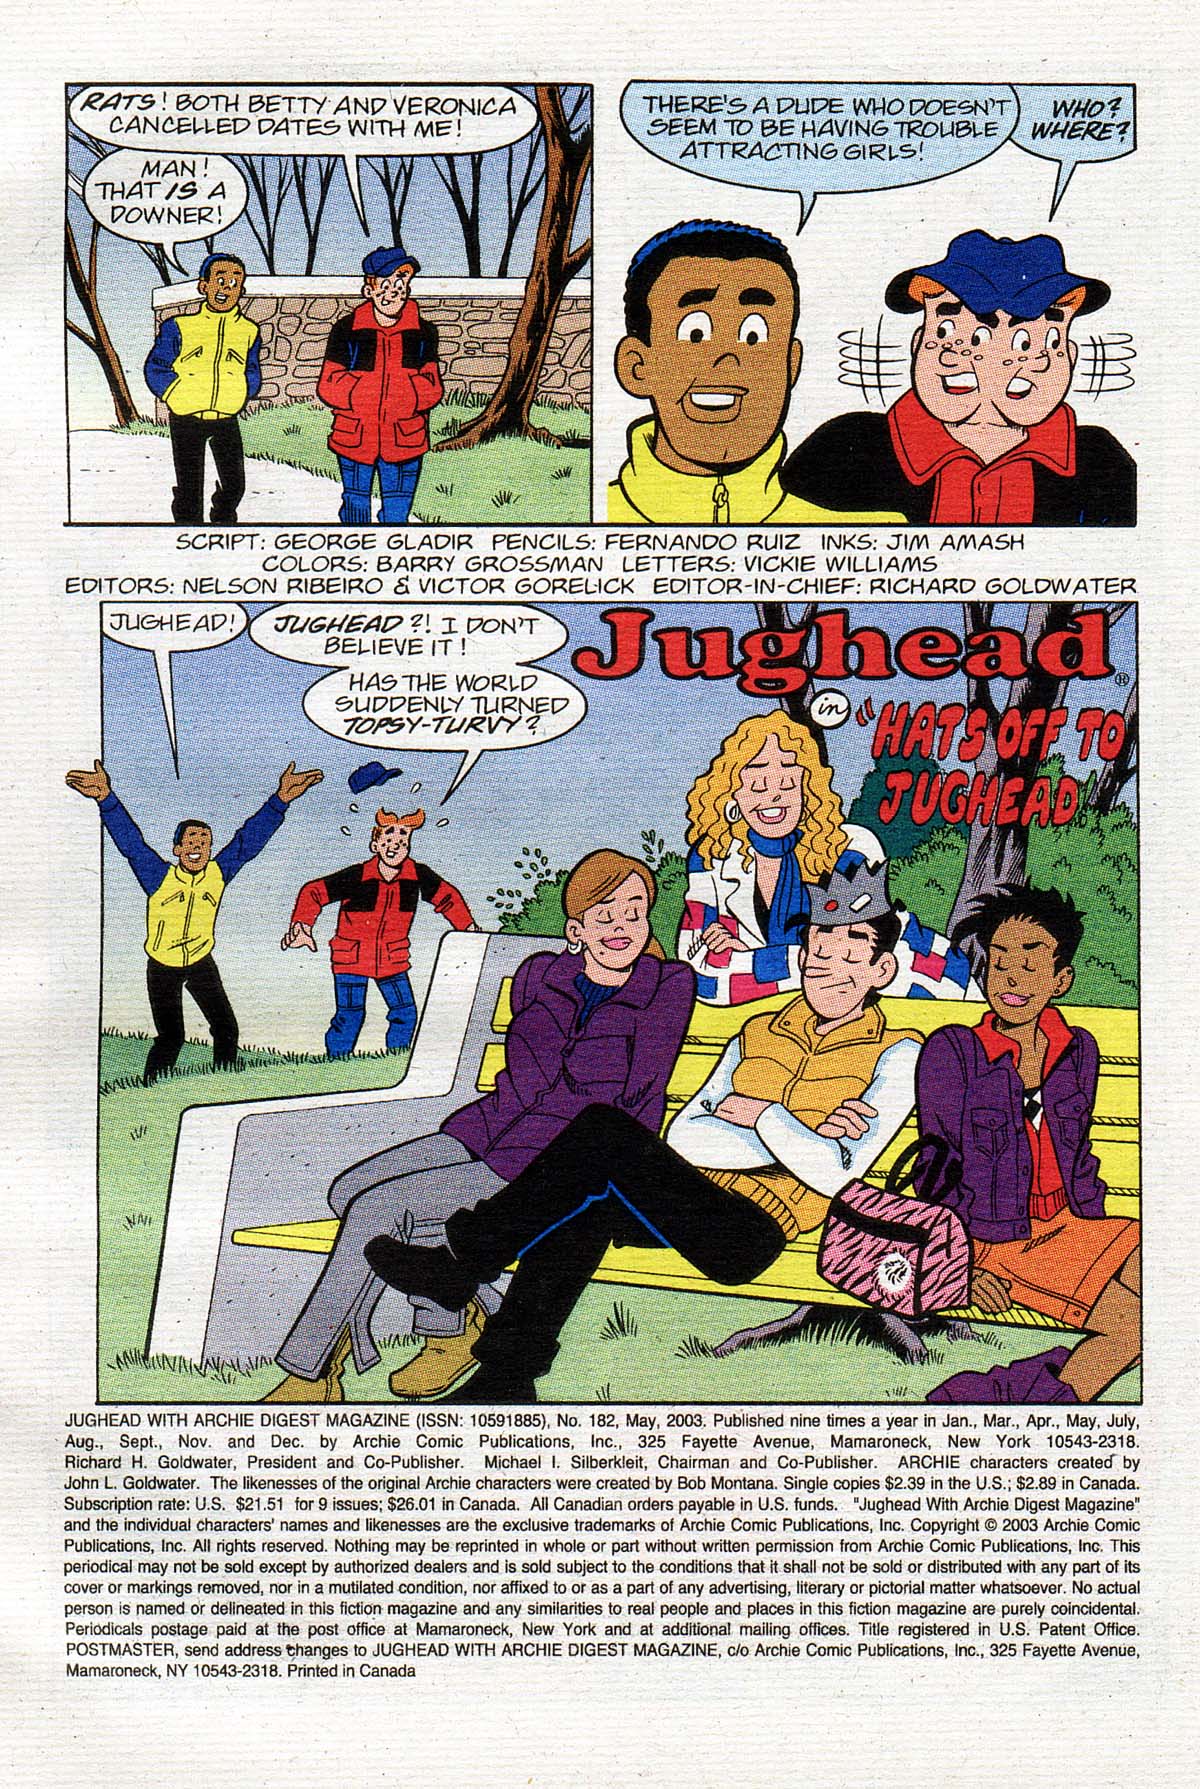 Jughead With Archie Digest Magazine Issue 182 | Read Jughead With Archie  Digest Magazine Issue 182 comic online in high quality. Read Full Comic  online for free - Read comics online in